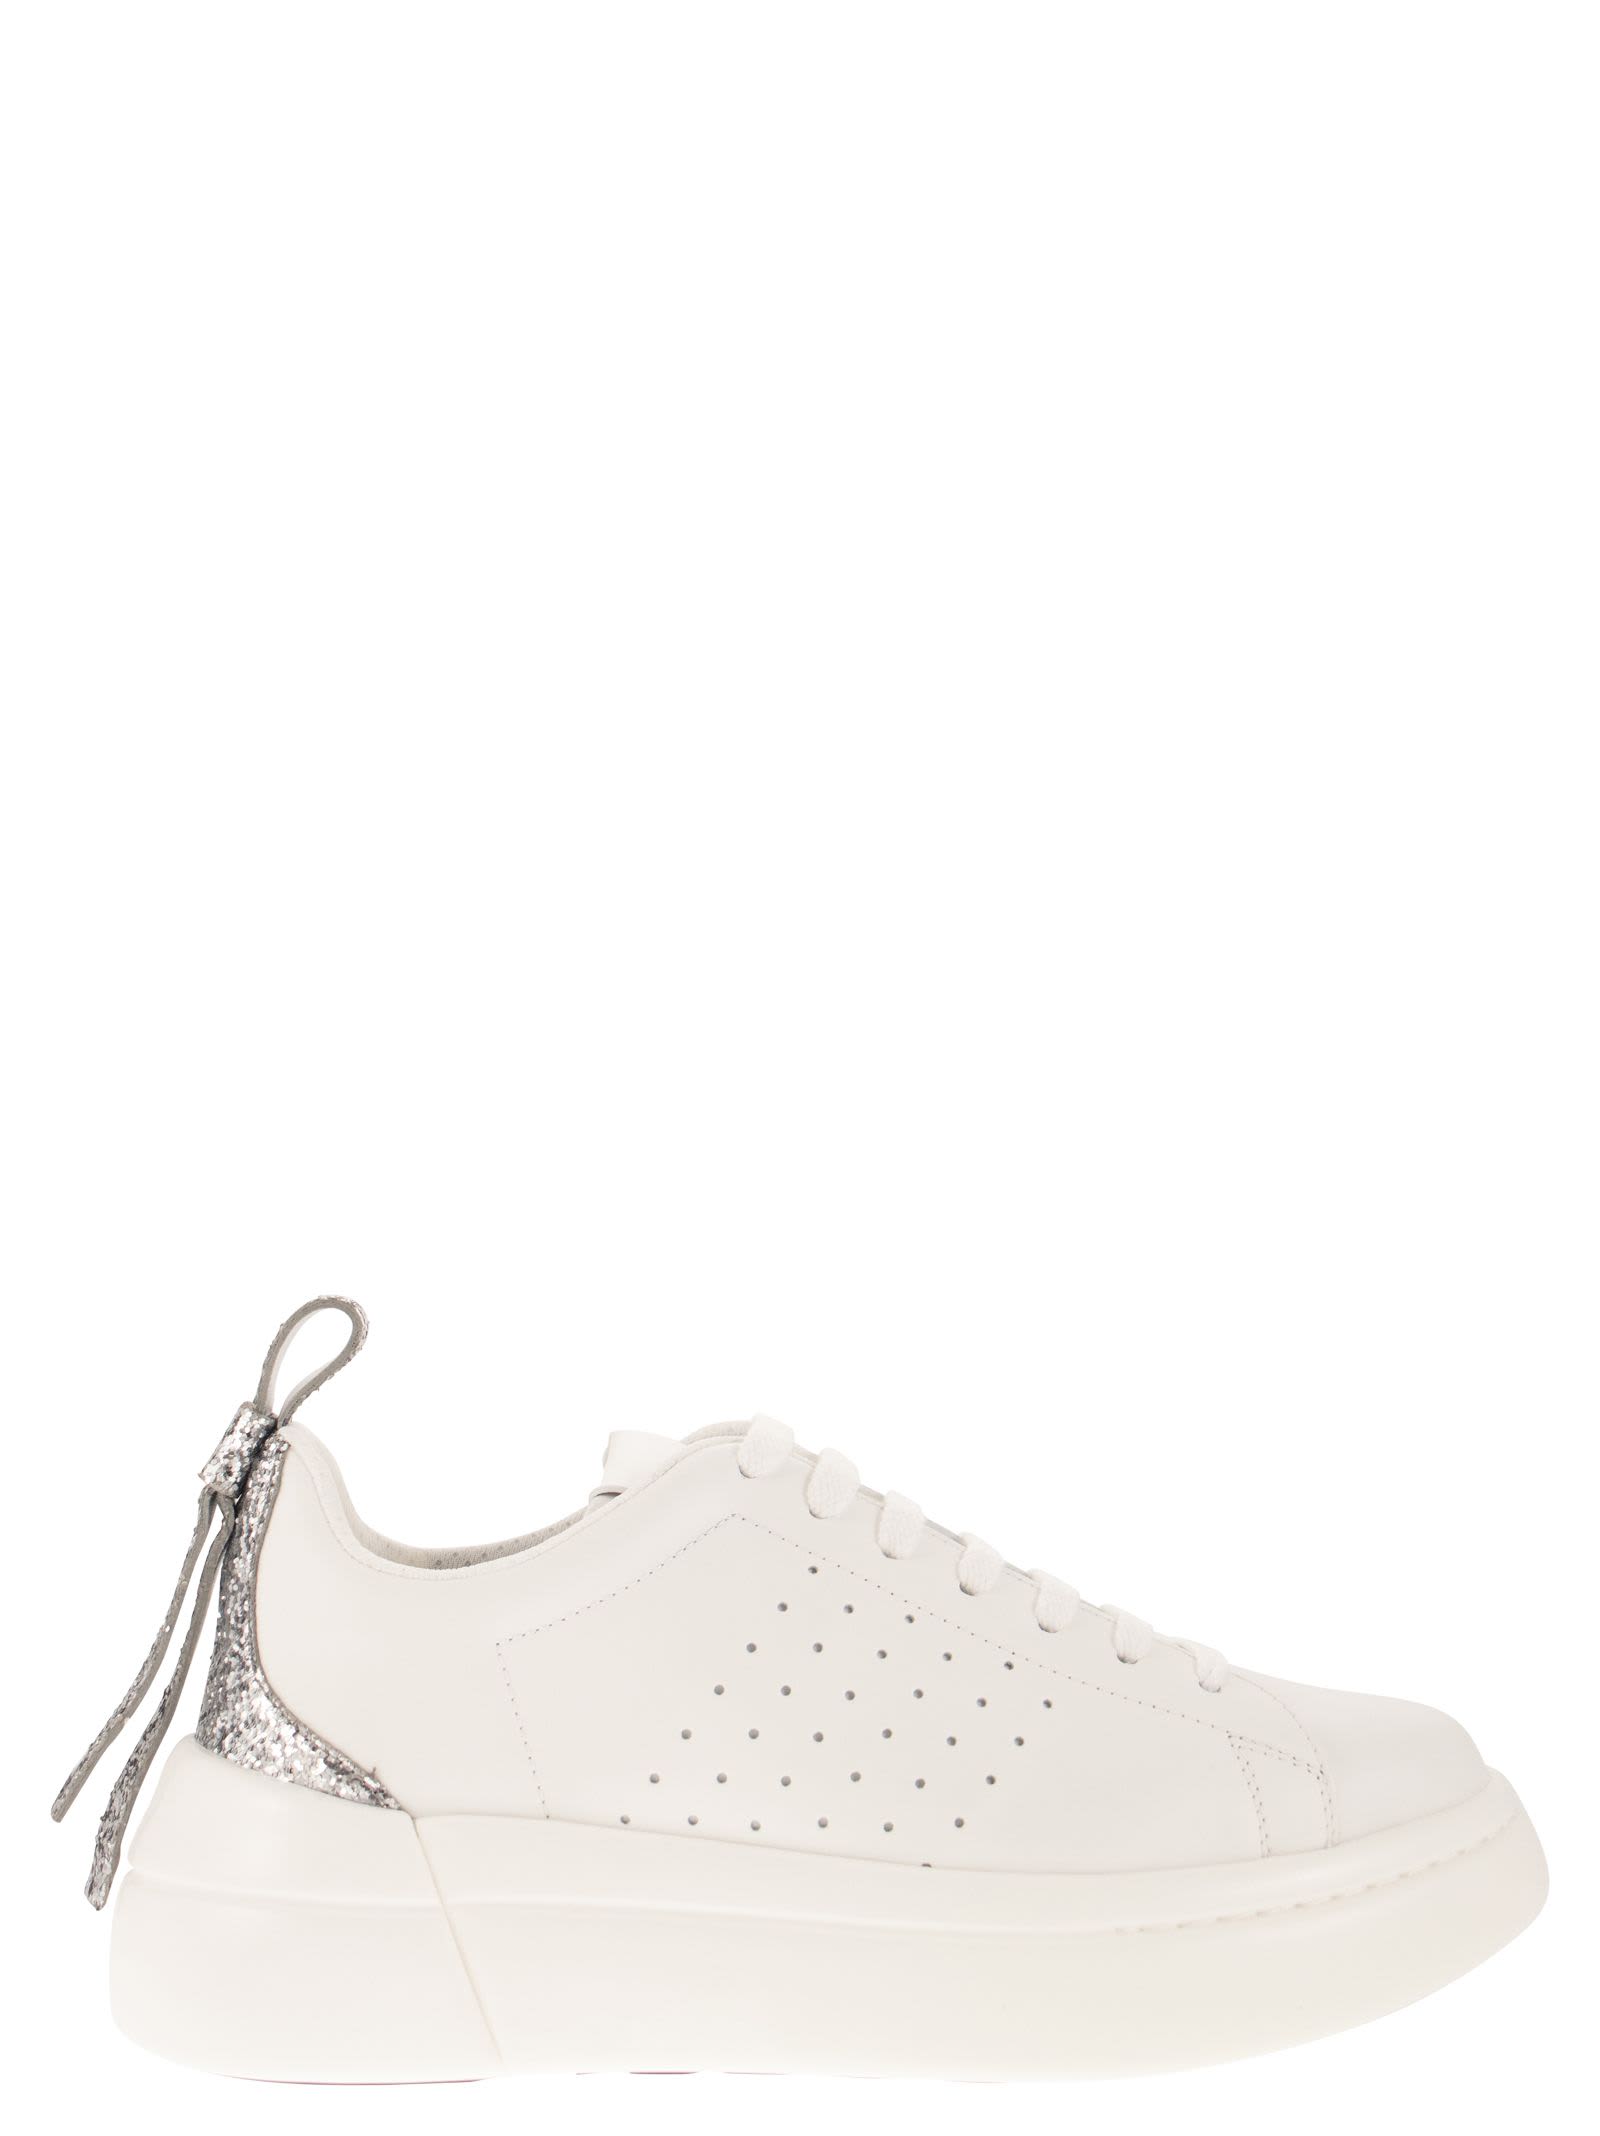 Valentino Red V Womans Bowalk White Leather Bicolor Sneakers | ModeSens